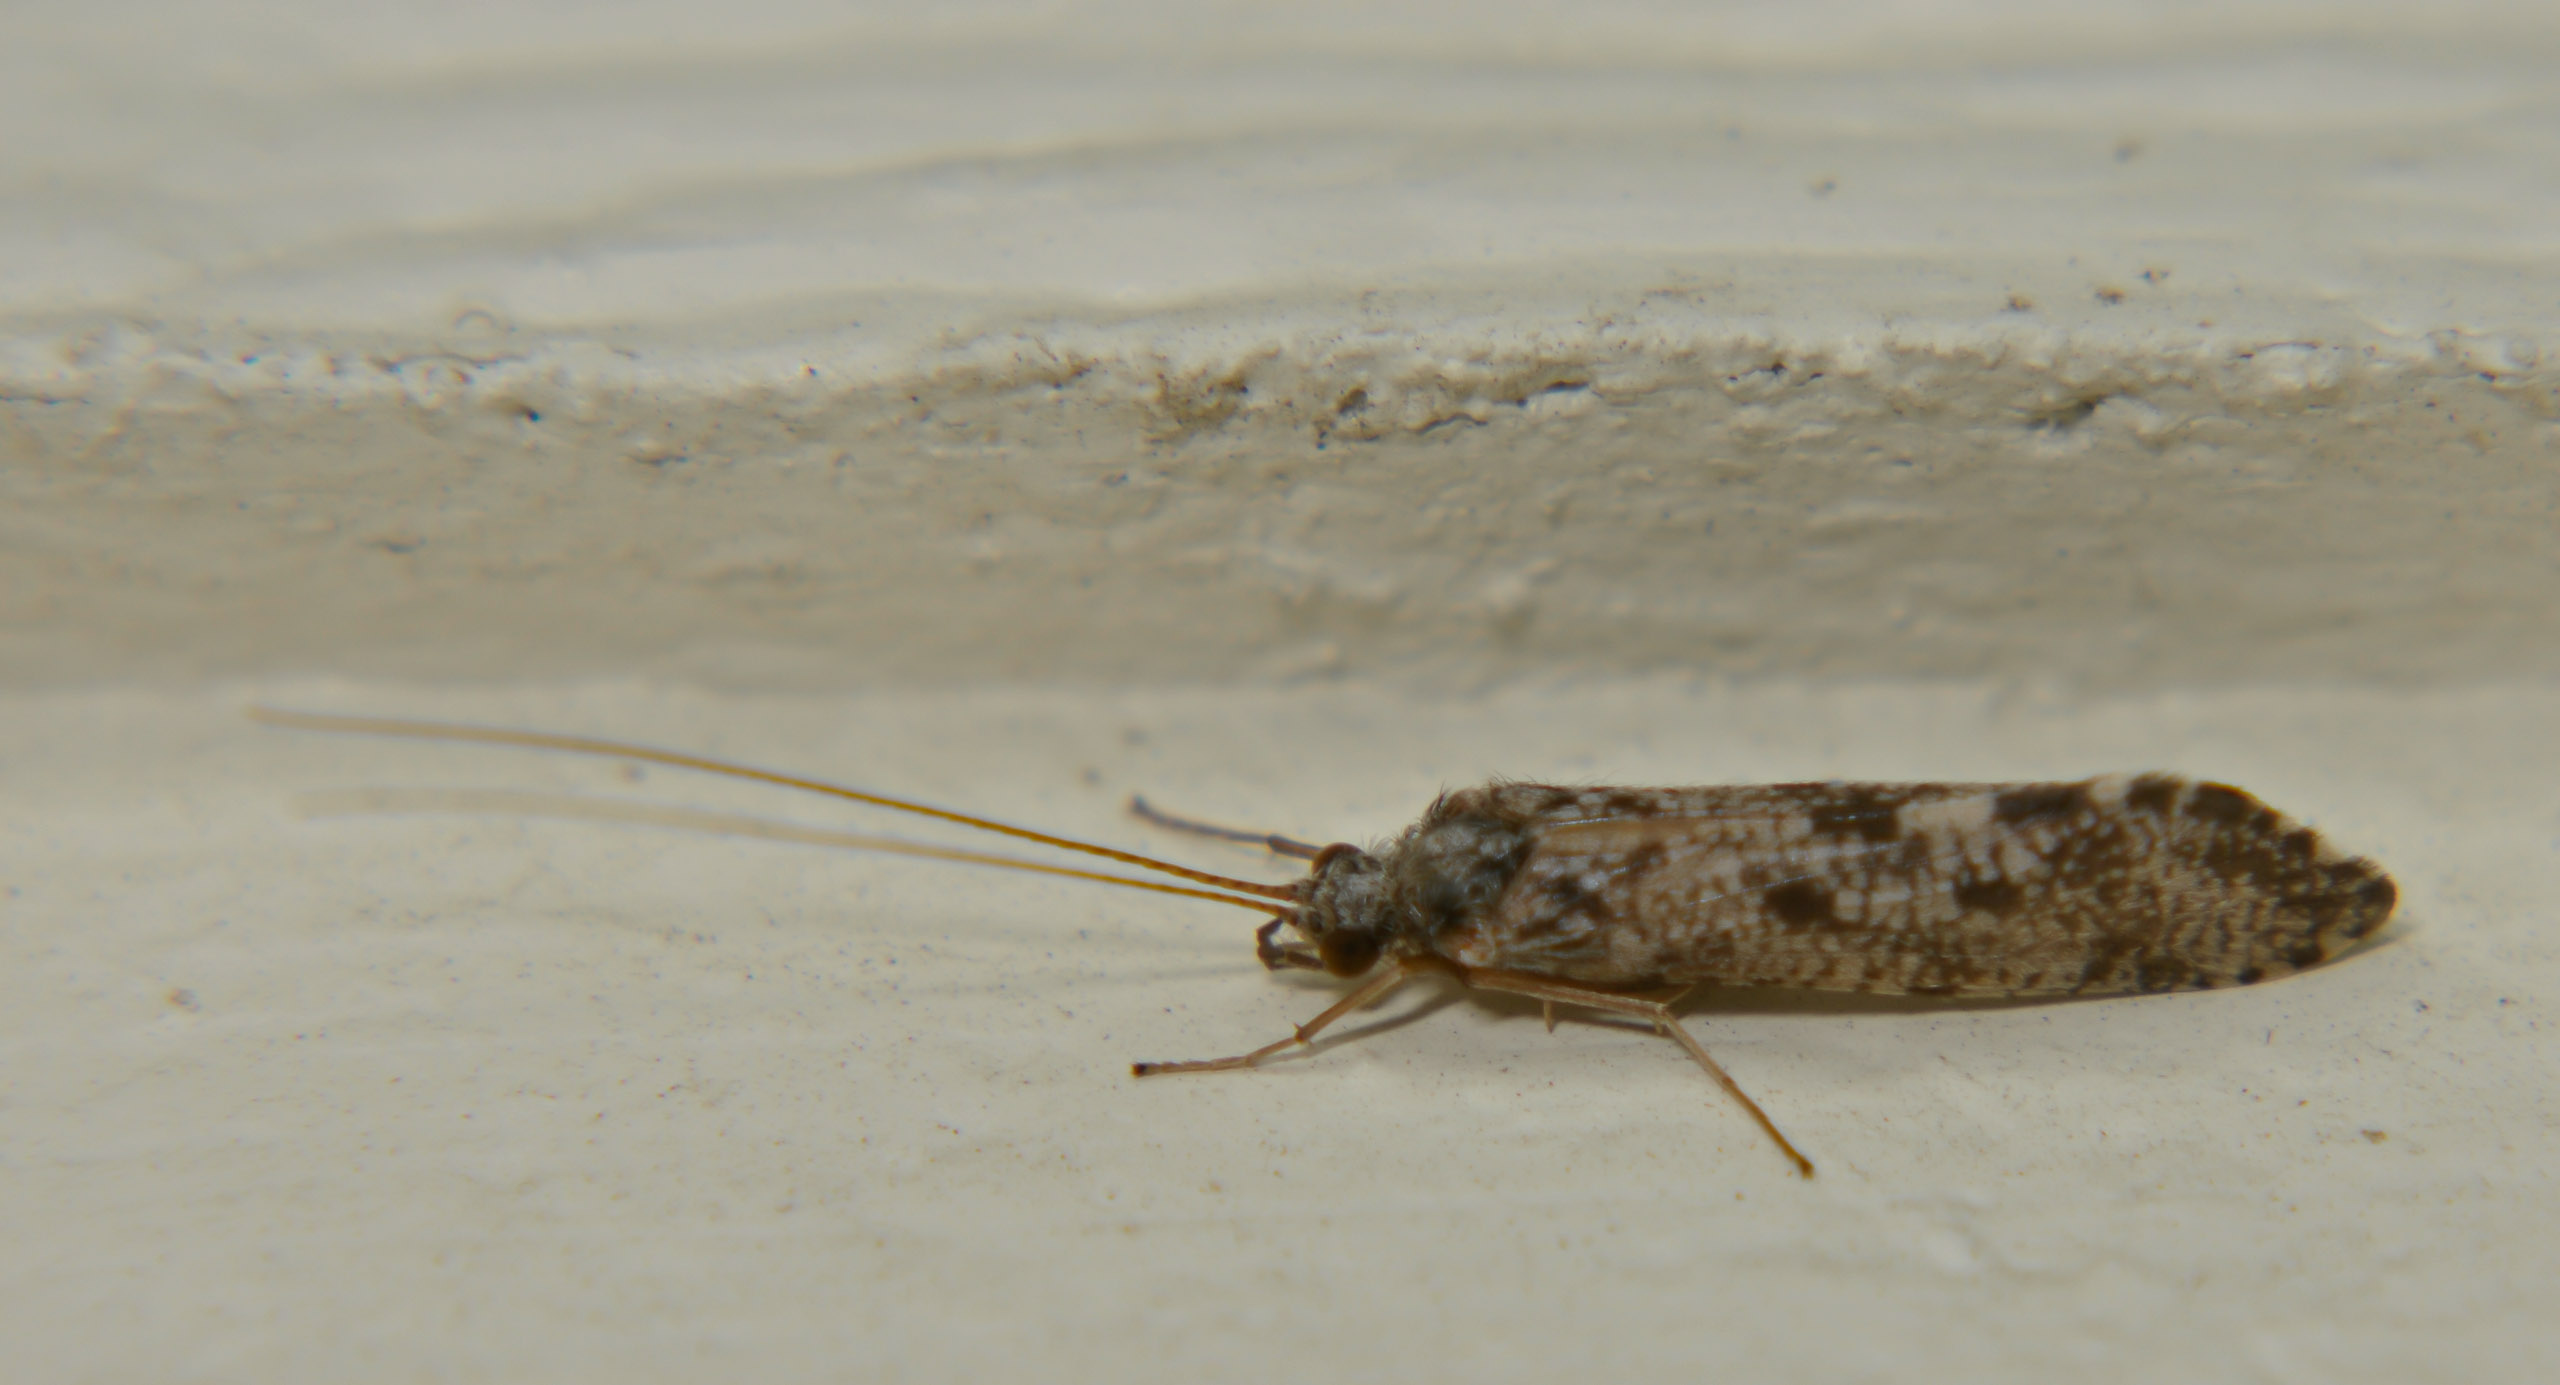 Hydropsychidae Caddisfly Adult from the Touchet River in Washington